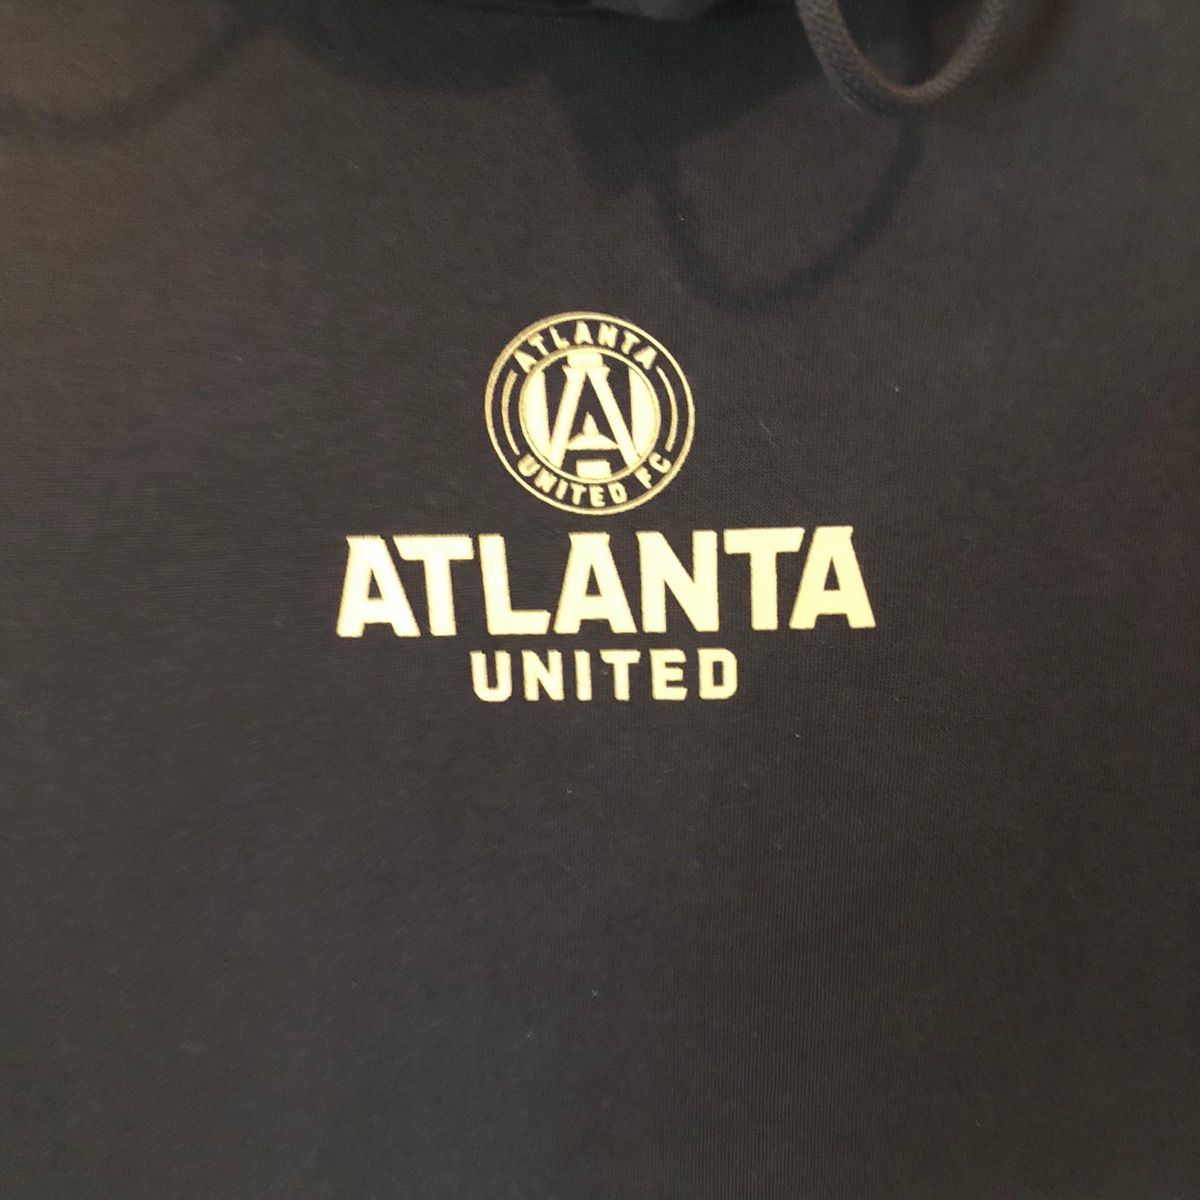 Mitchell & Ness Atlanta United Soccer Hoodie Black Med Hoody Mitchell &Ness Size US M / EU 48-50 / 2 - 2 Preview